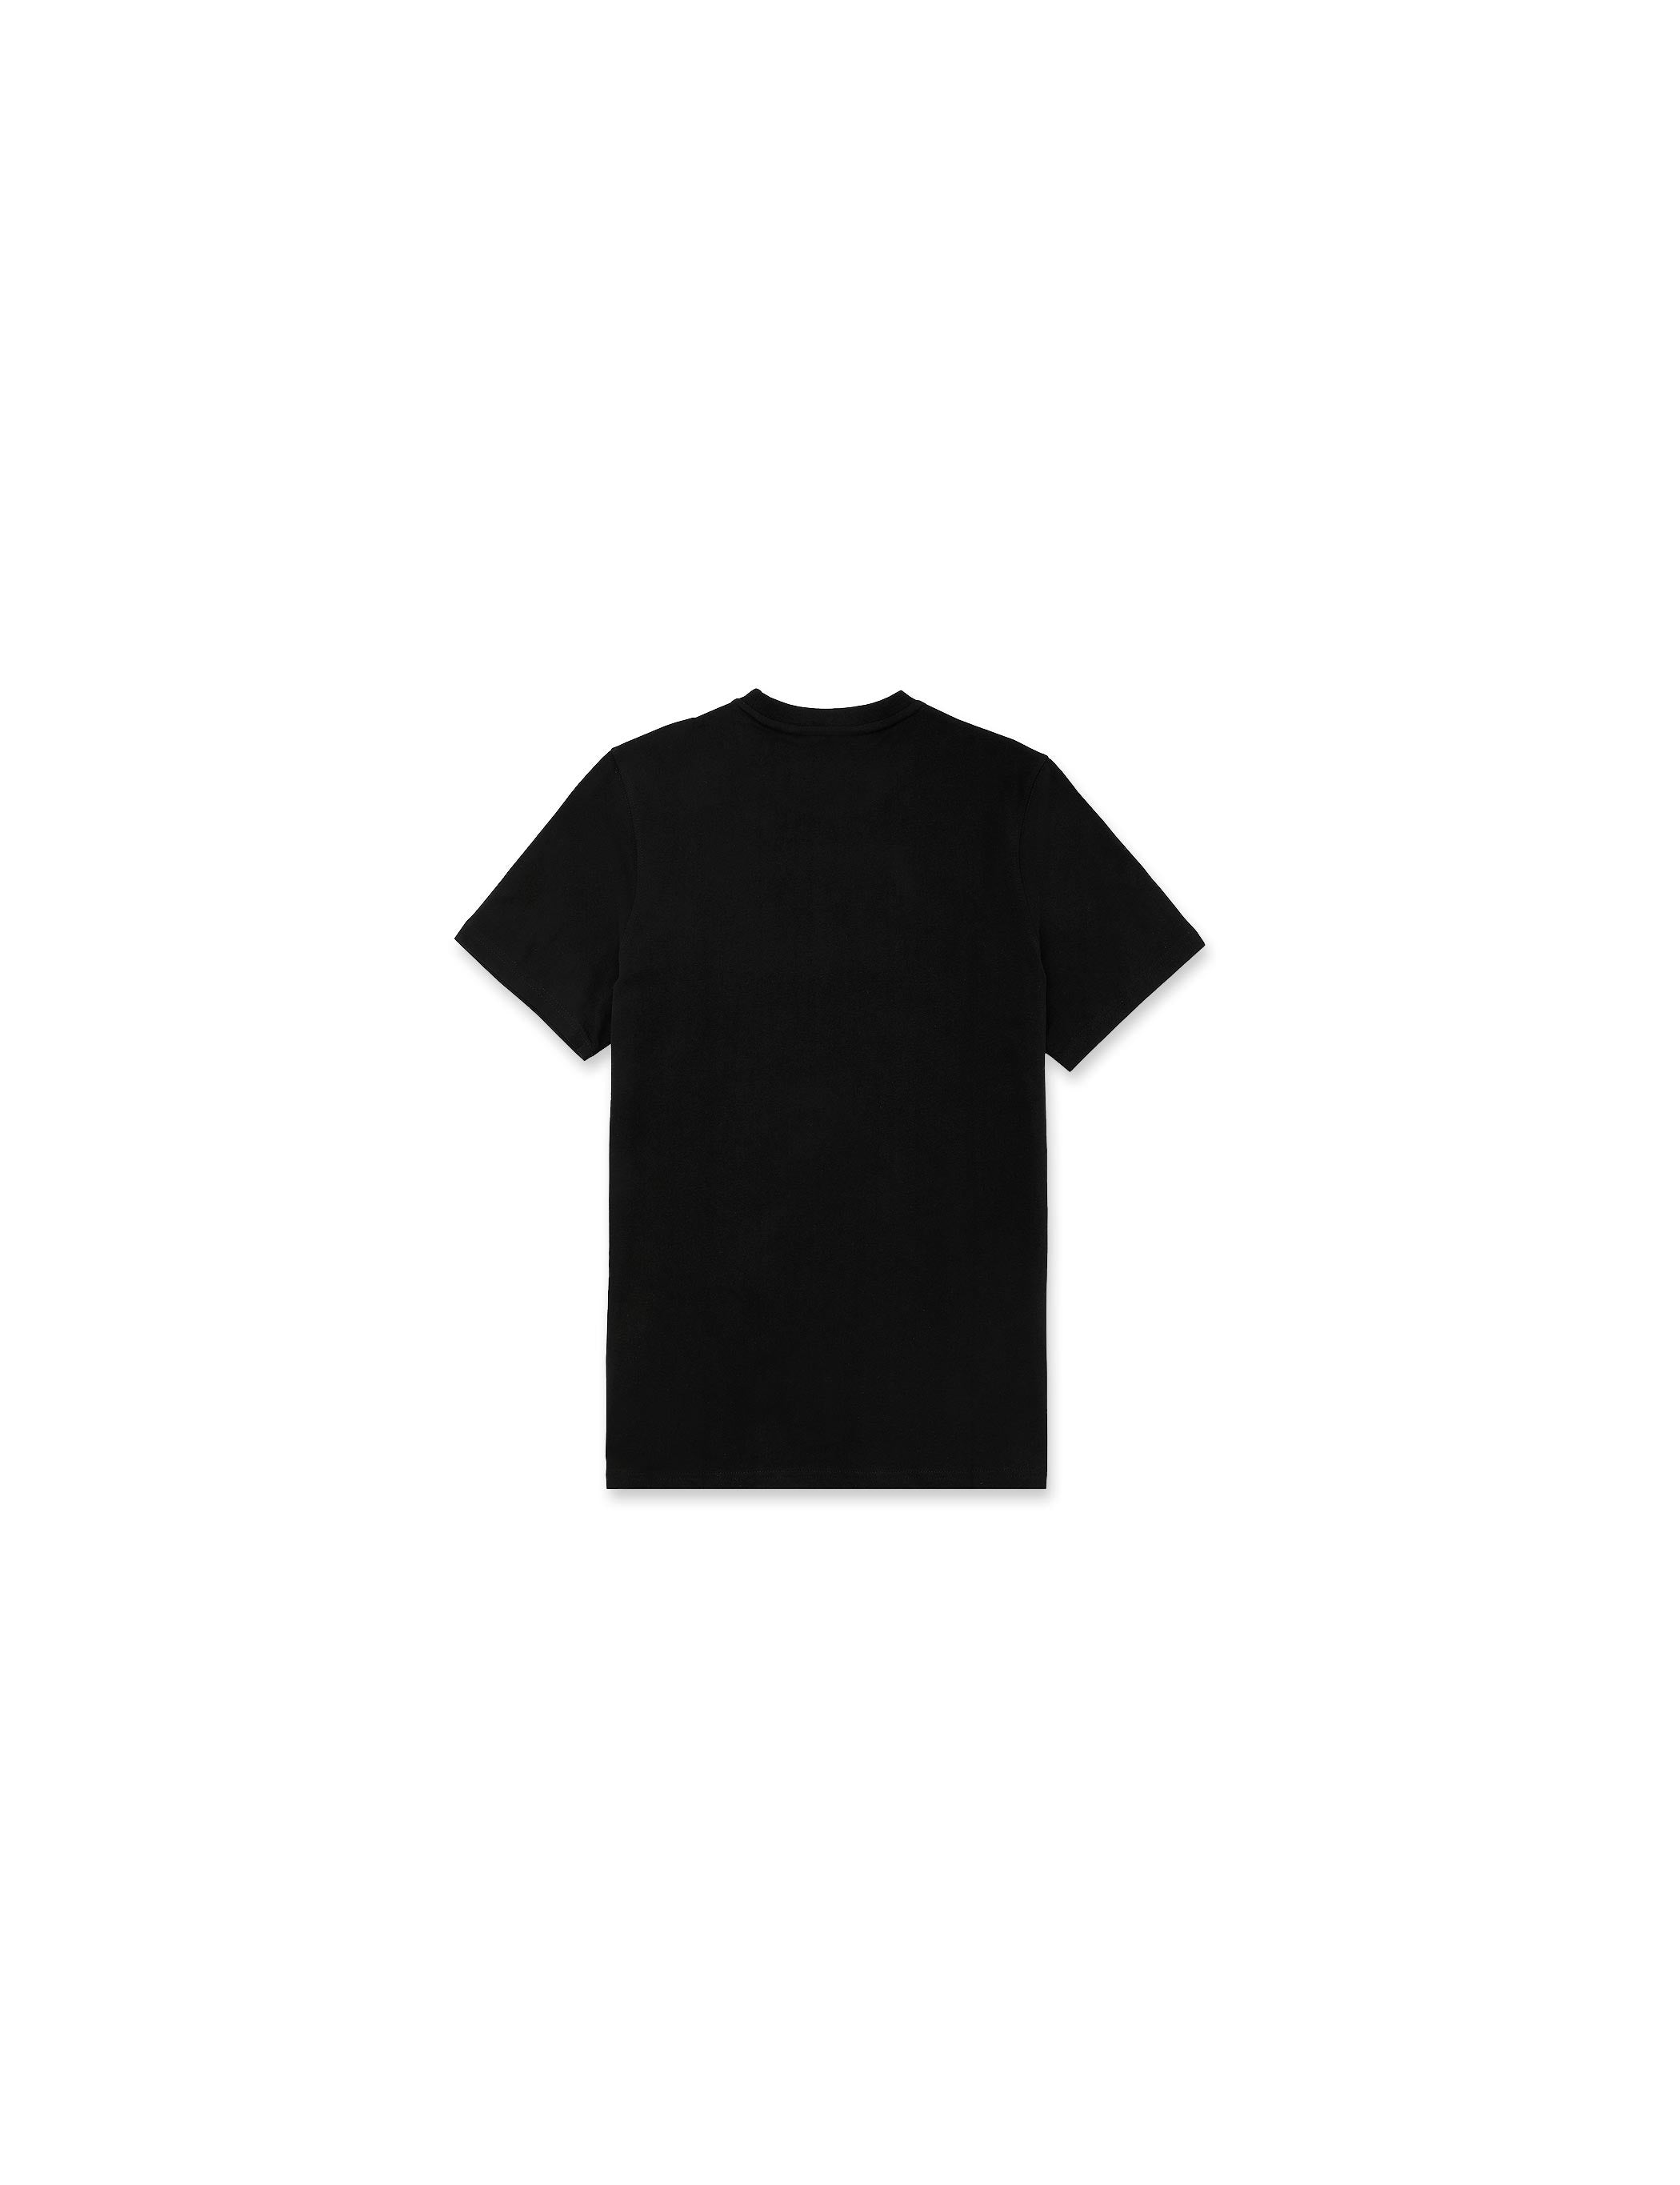 ESSENCE SS TEE - BLACK - Embreys Projects